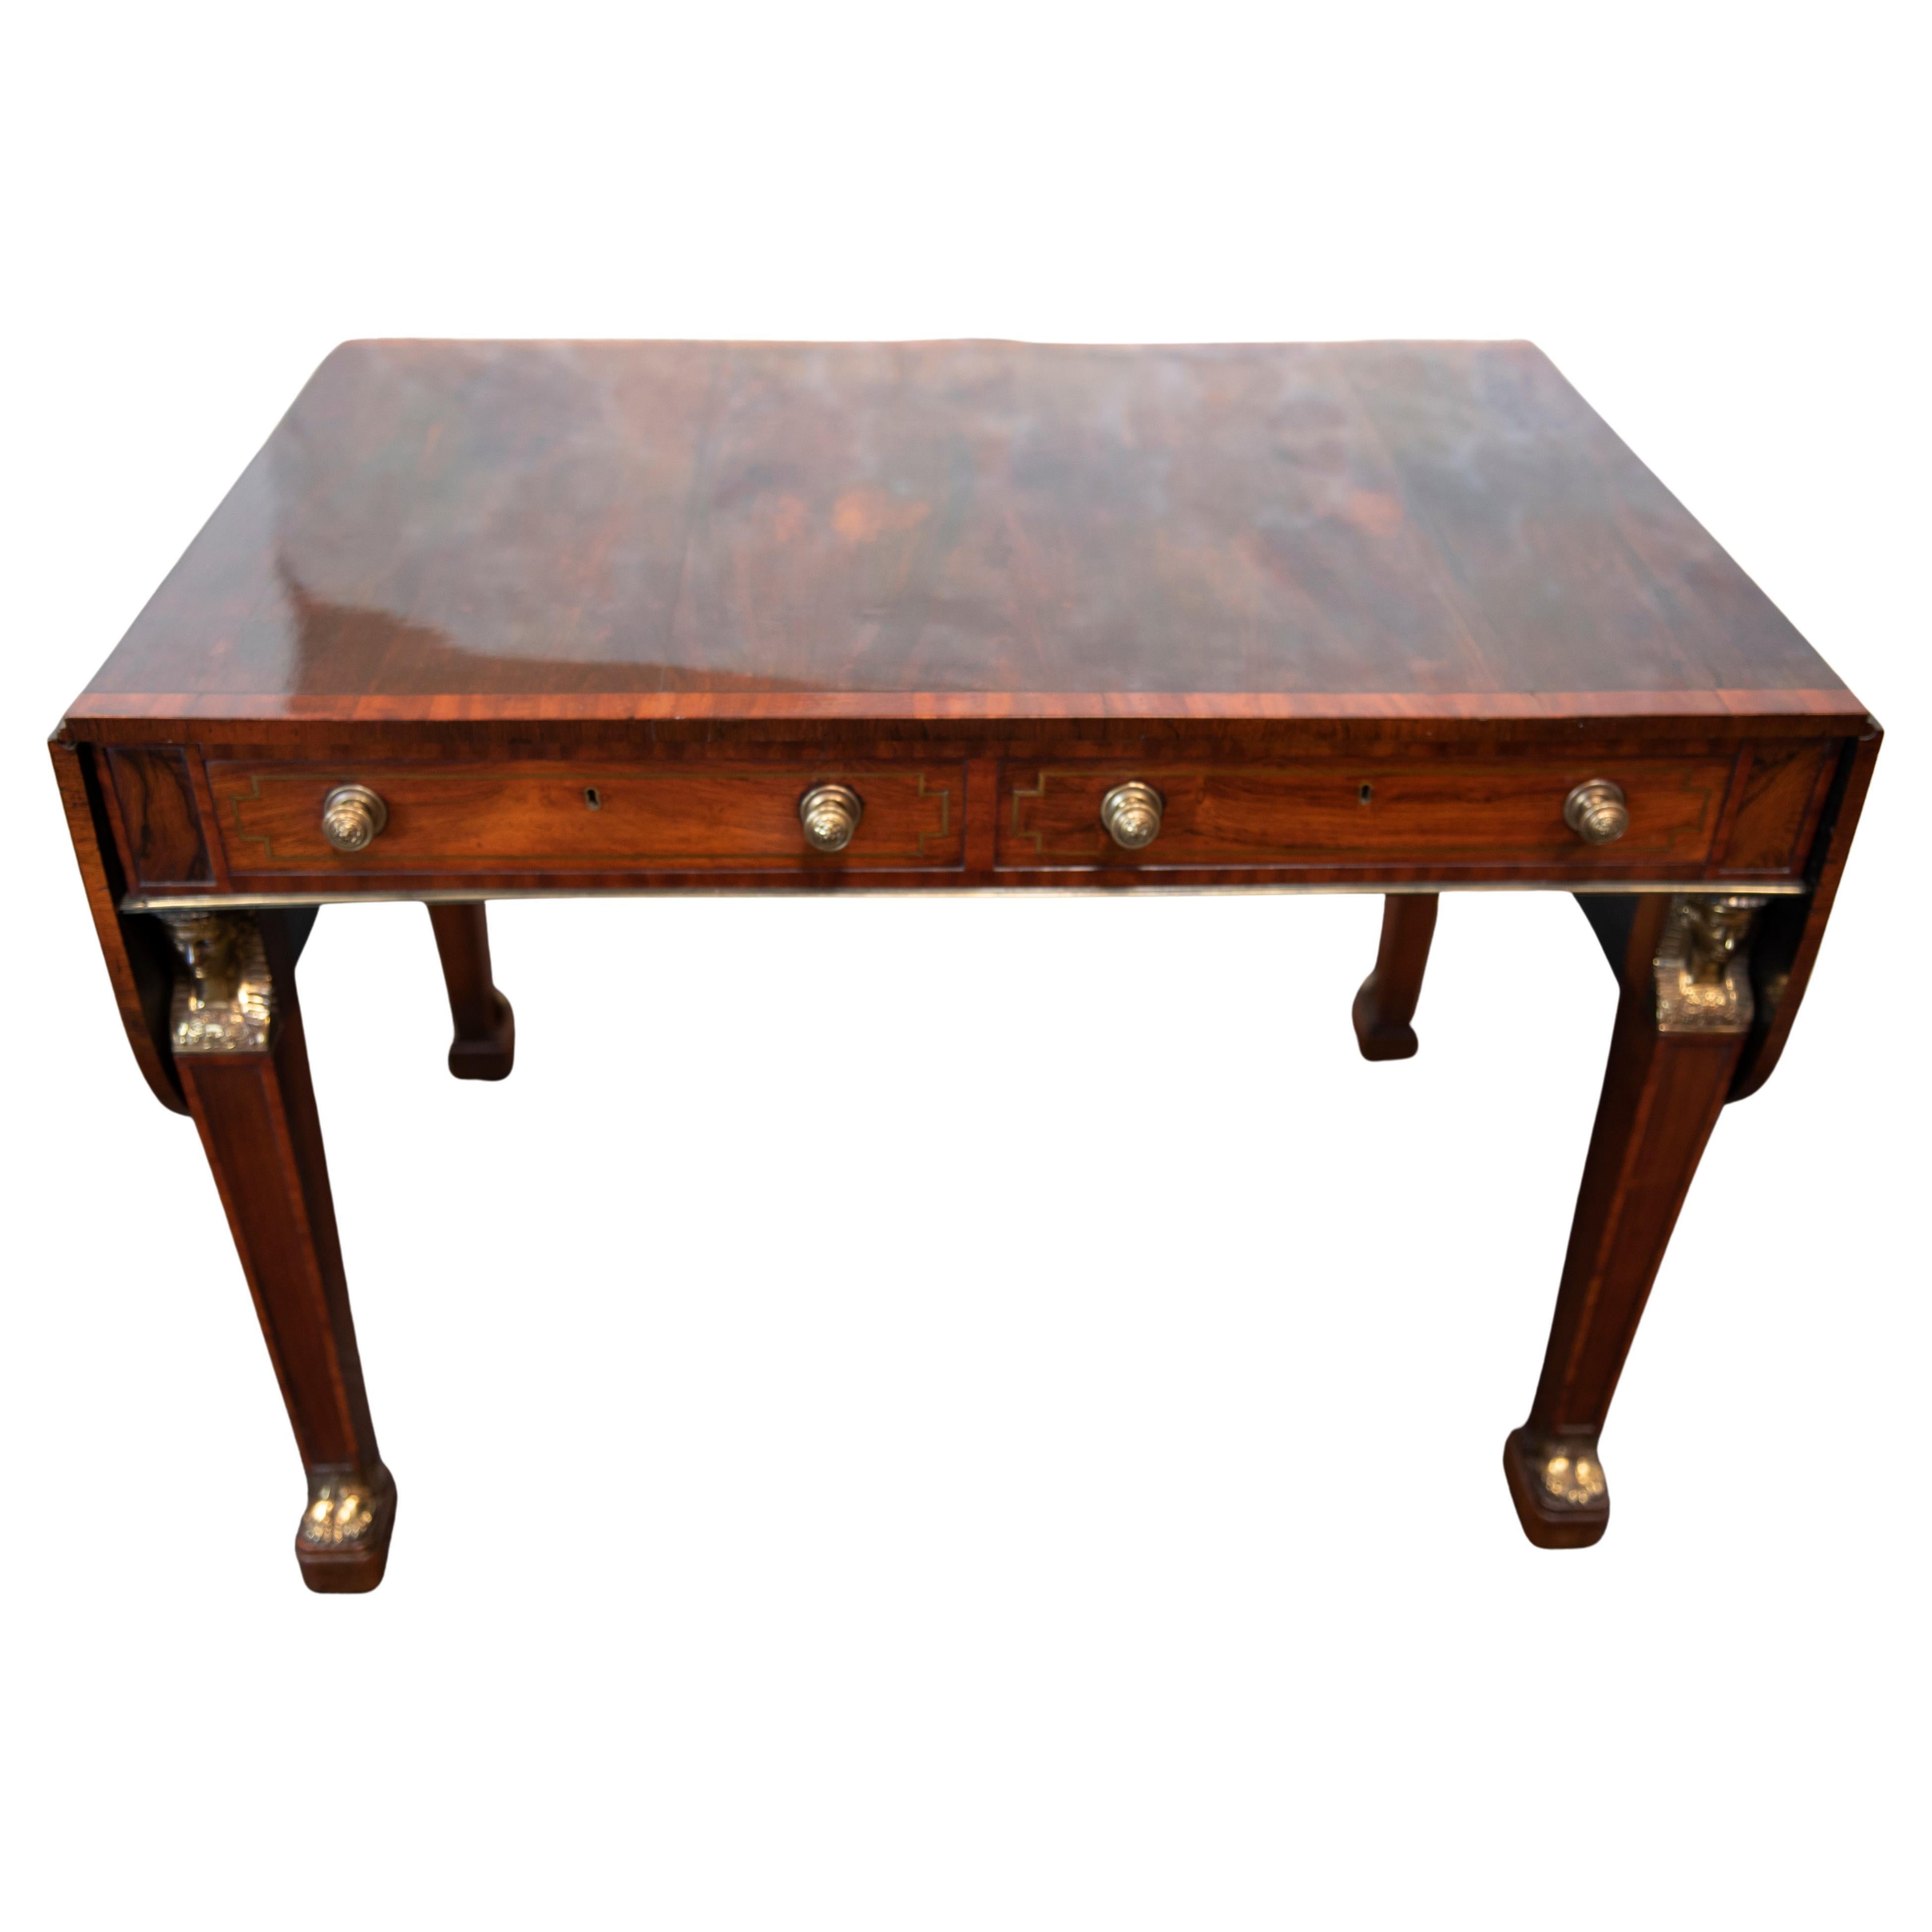 George III Regency period mahogany sofa table in the manner of Thomas Chippendale the Younger. The rounded rectangular twin flap top cross banded in satinwood with two cedar lined frieze drawers inlaid with brass stringing on gilt metal mounted